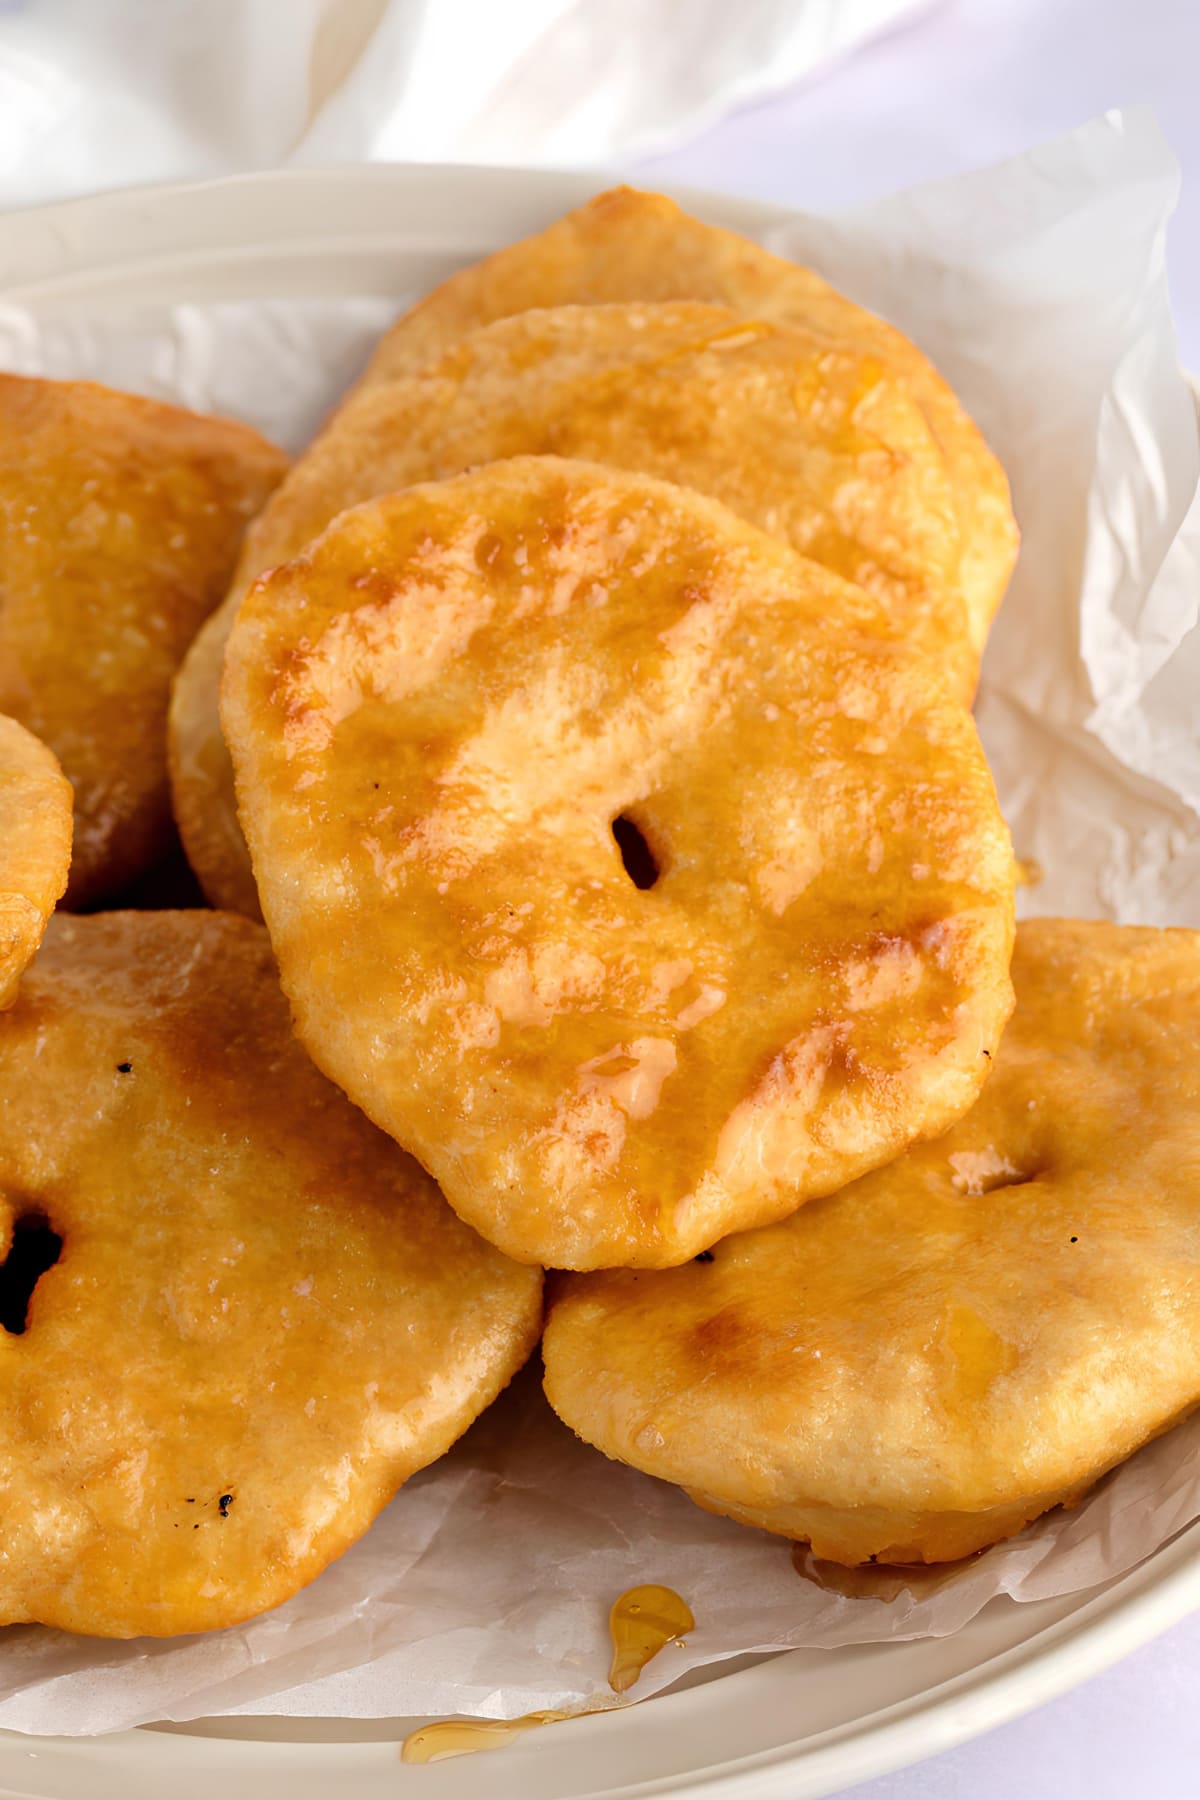 Best Native American Fry Bread (Easy Recipe) featuring Homemade Soft and Crispy Fry Bread in Parchment Paper